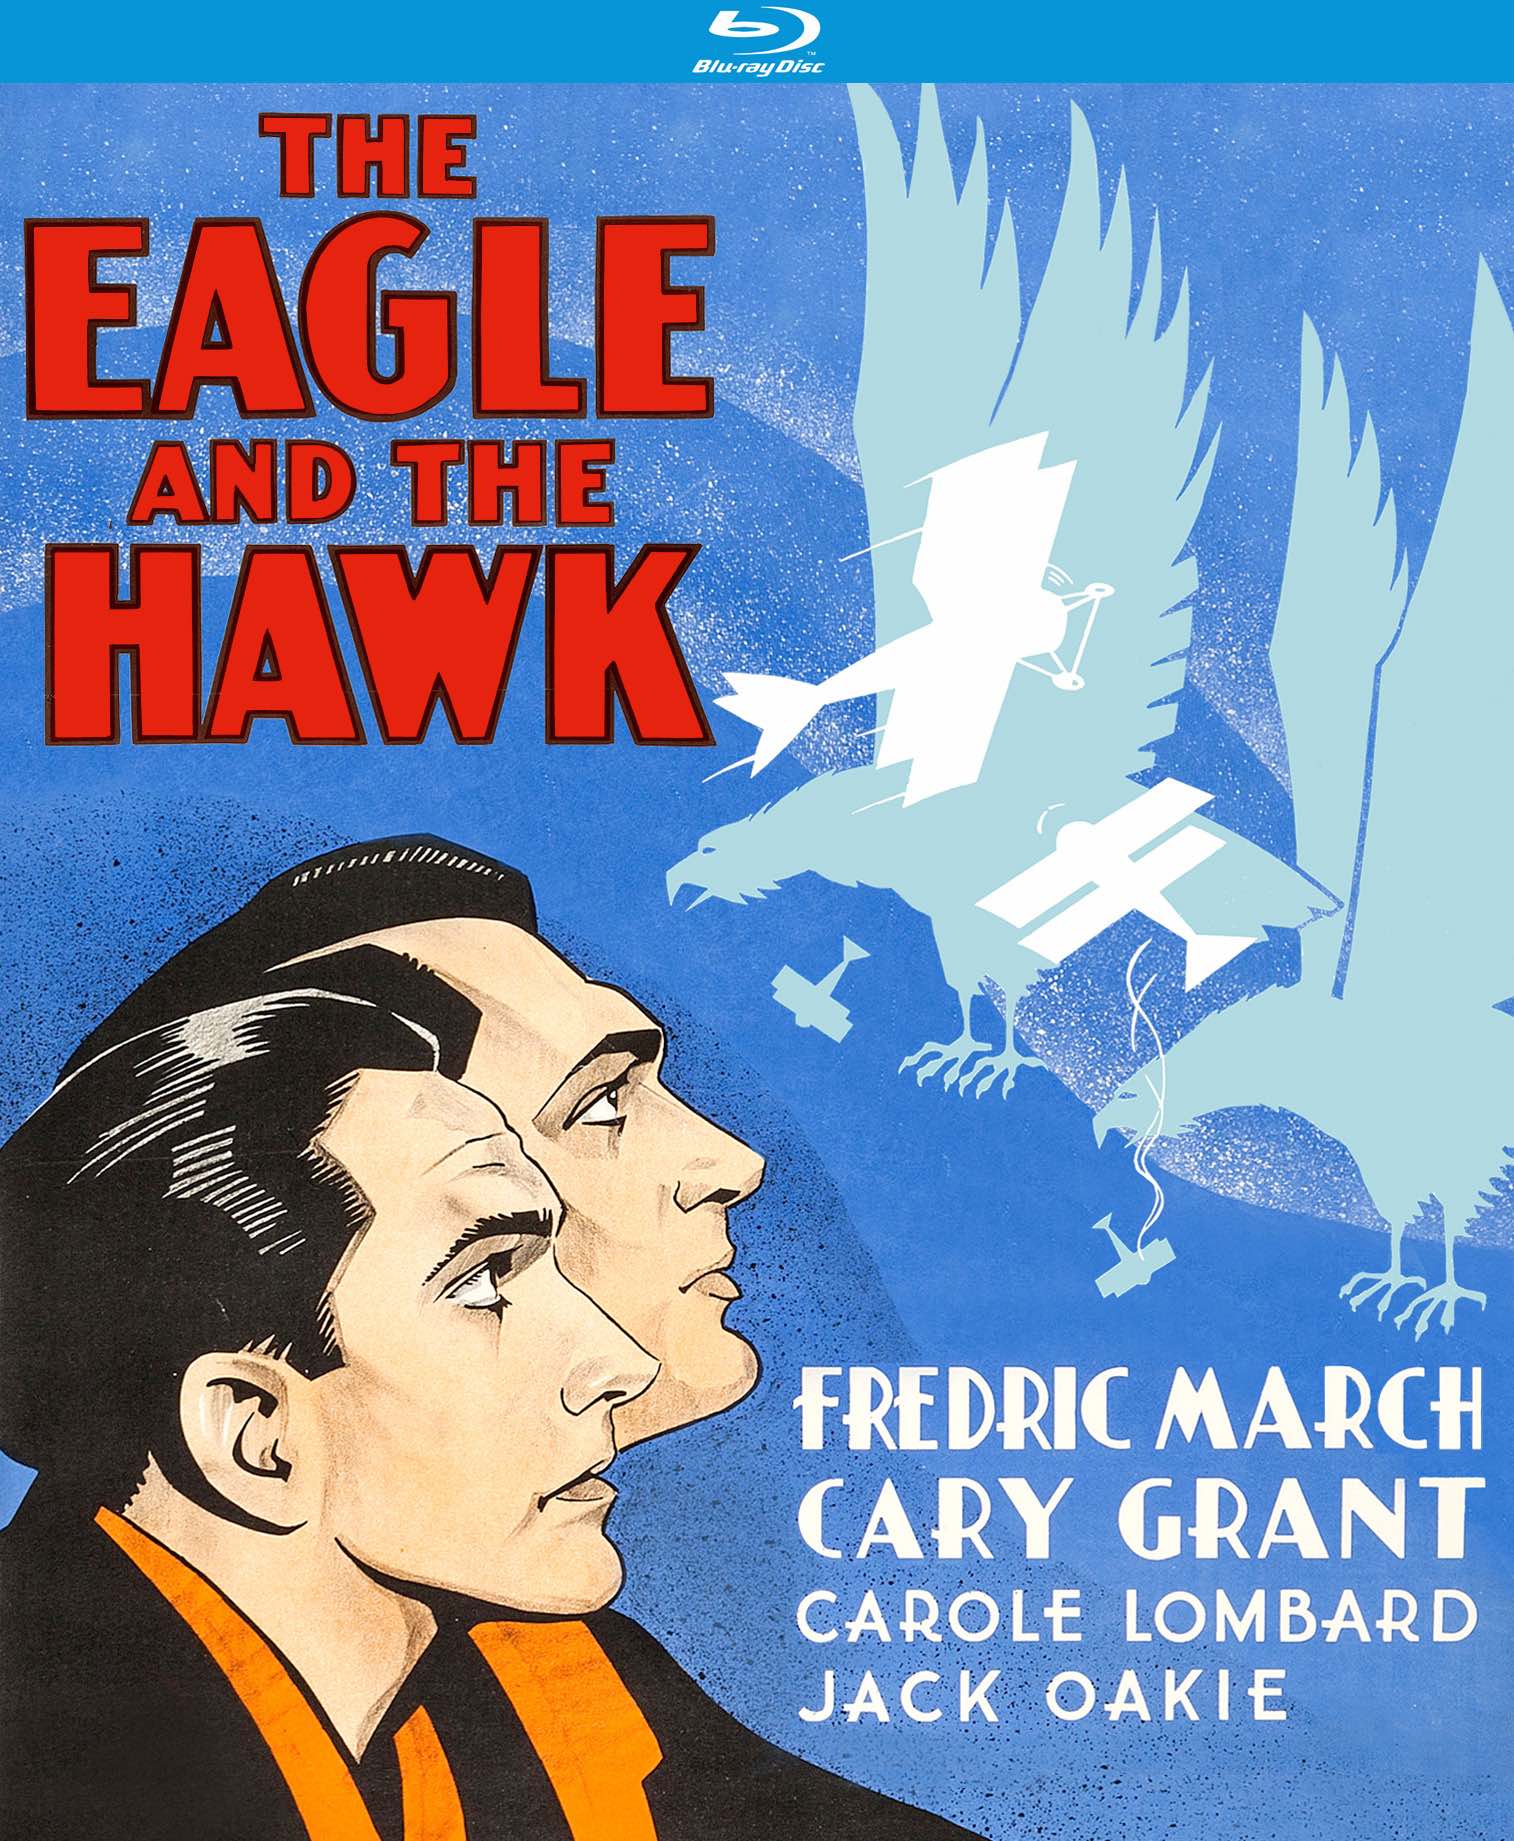 The Eagle and the Hawk [Blu-ray] [1933]